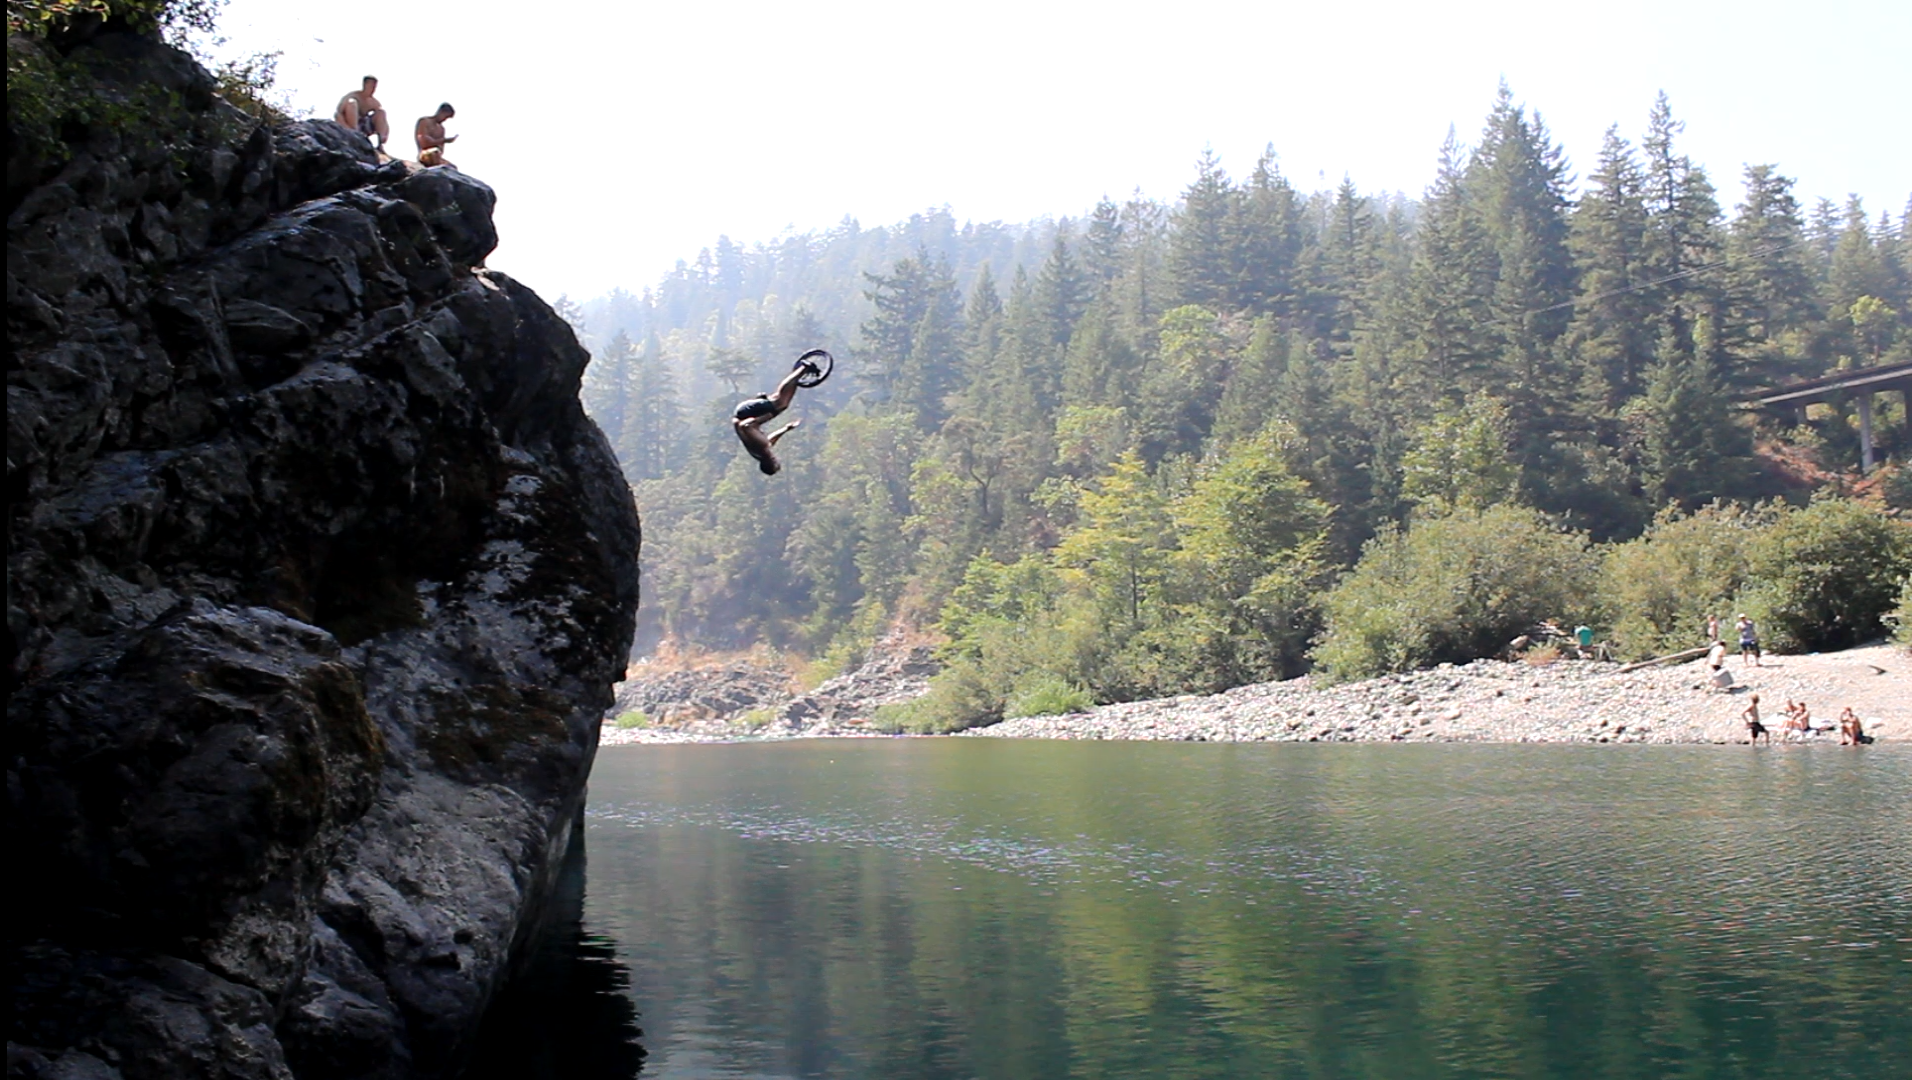 Alex doing a flip down a cliff with his unicycle